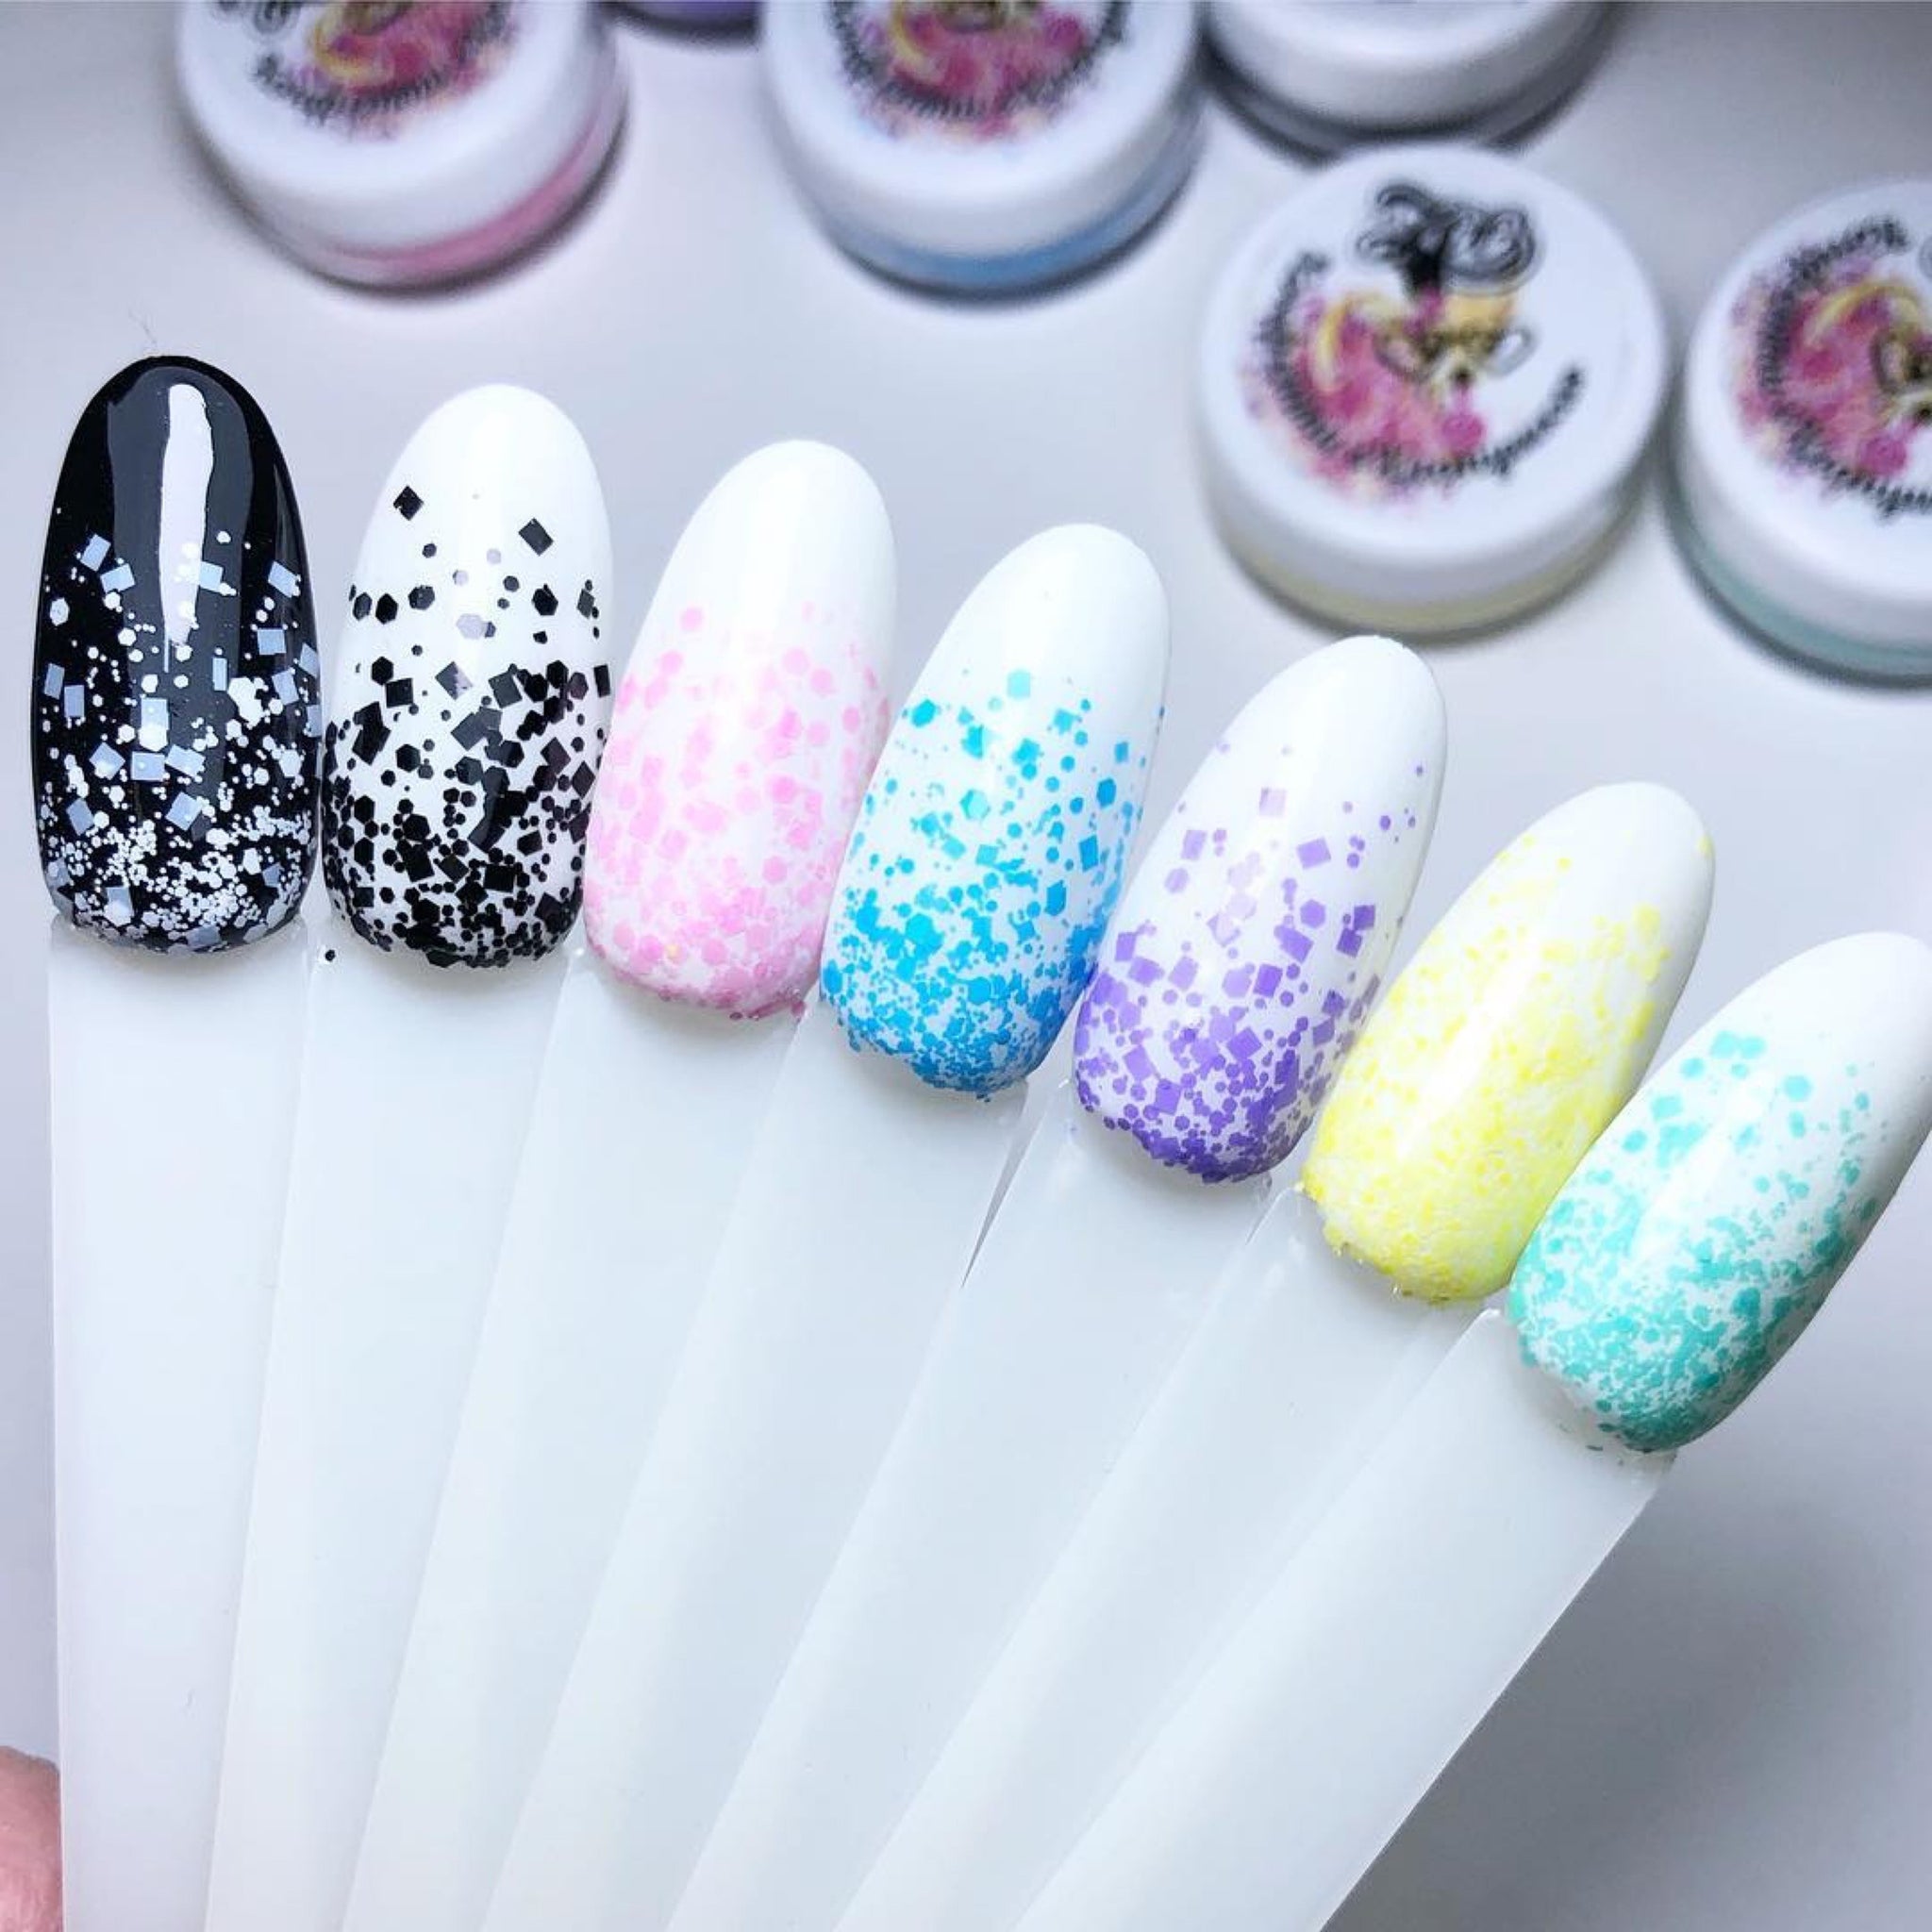 A Certain Becca Nails: 26 Great Nail Art Ideas - Pastel to Bold Gradient  with Something on Top